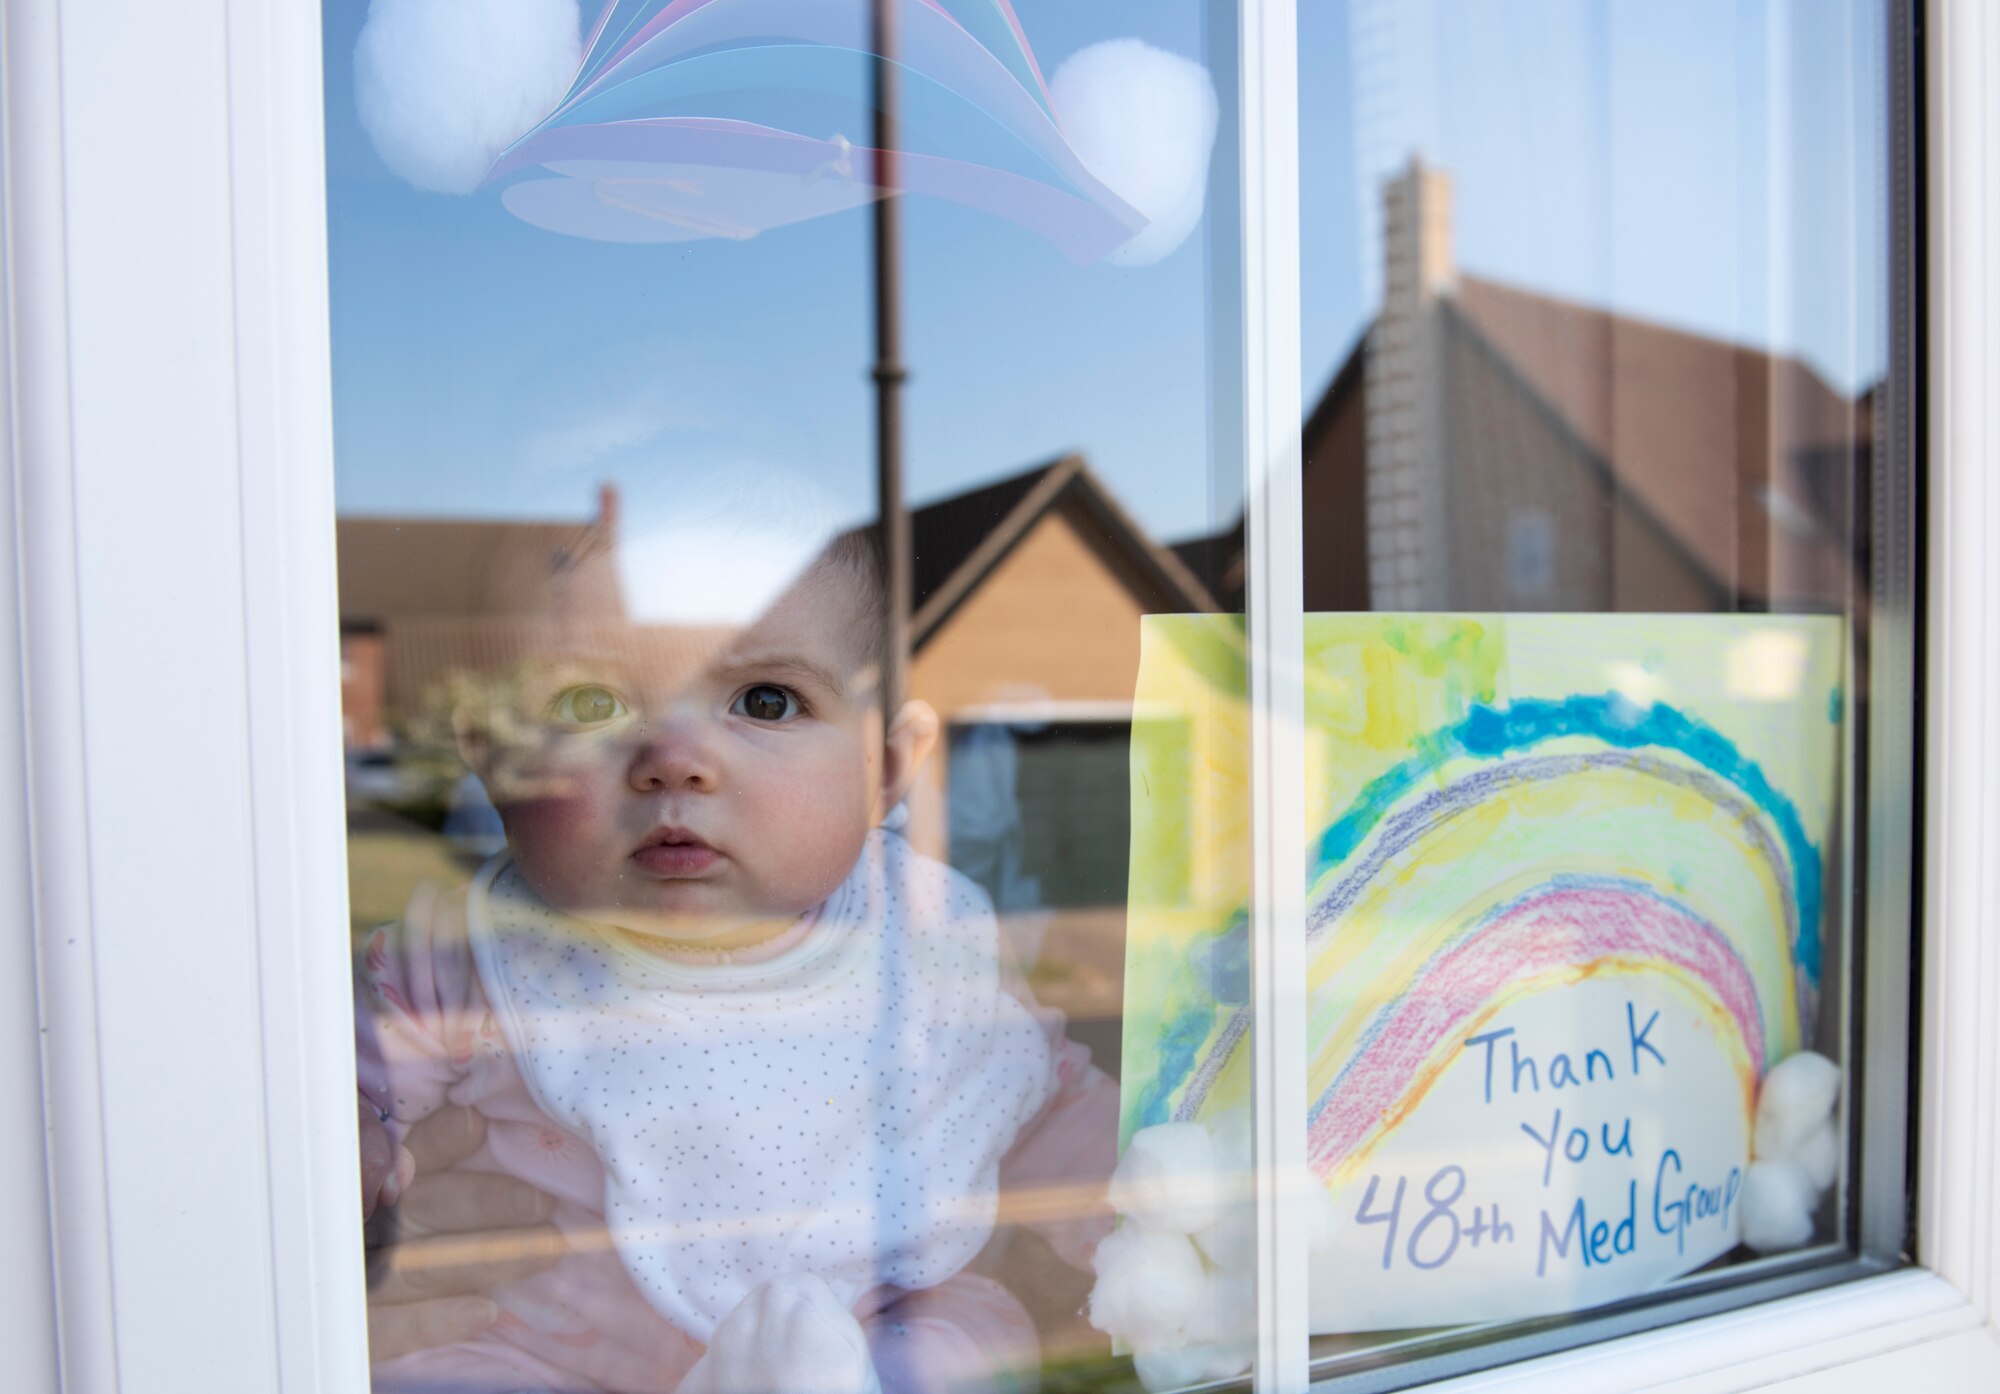 A child of a U.S. Air Force Airman displays rainbow artwork in their window in Liberty Village at Royal Air Force Lakenheath, England, April 22, 2020. The rainbow is a symbol of positivity and is often combined with a message of support for medical professionals serving on the front lines during the current COVID-19 crisis. (U.S. Air Force photo by Airman 1st Class Jessi Monte)